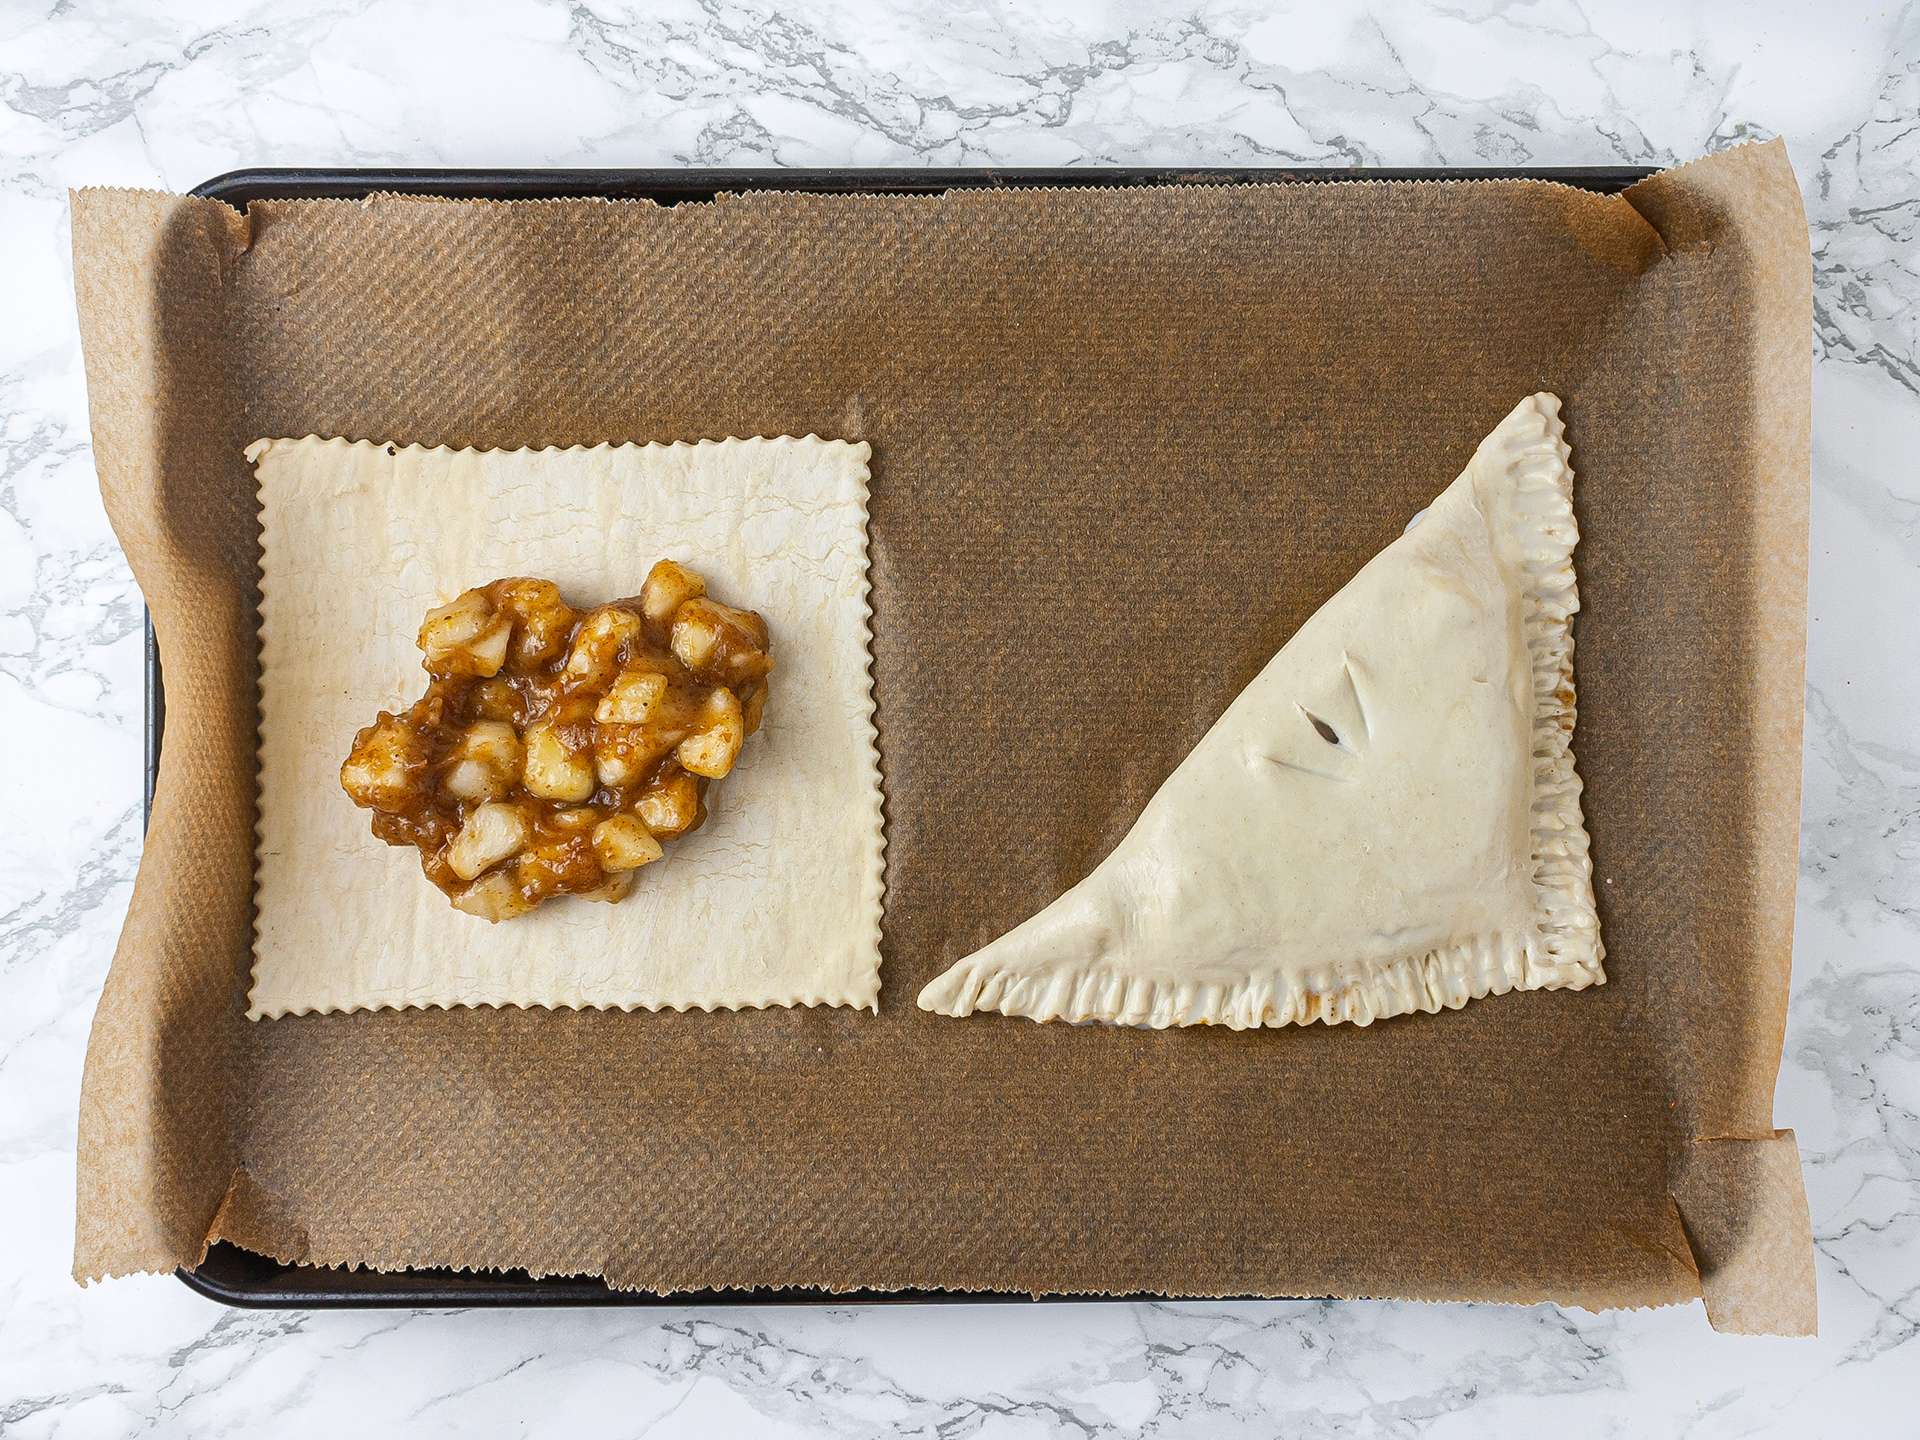 Gluten-free pastry sheets with pear and dates filling inside